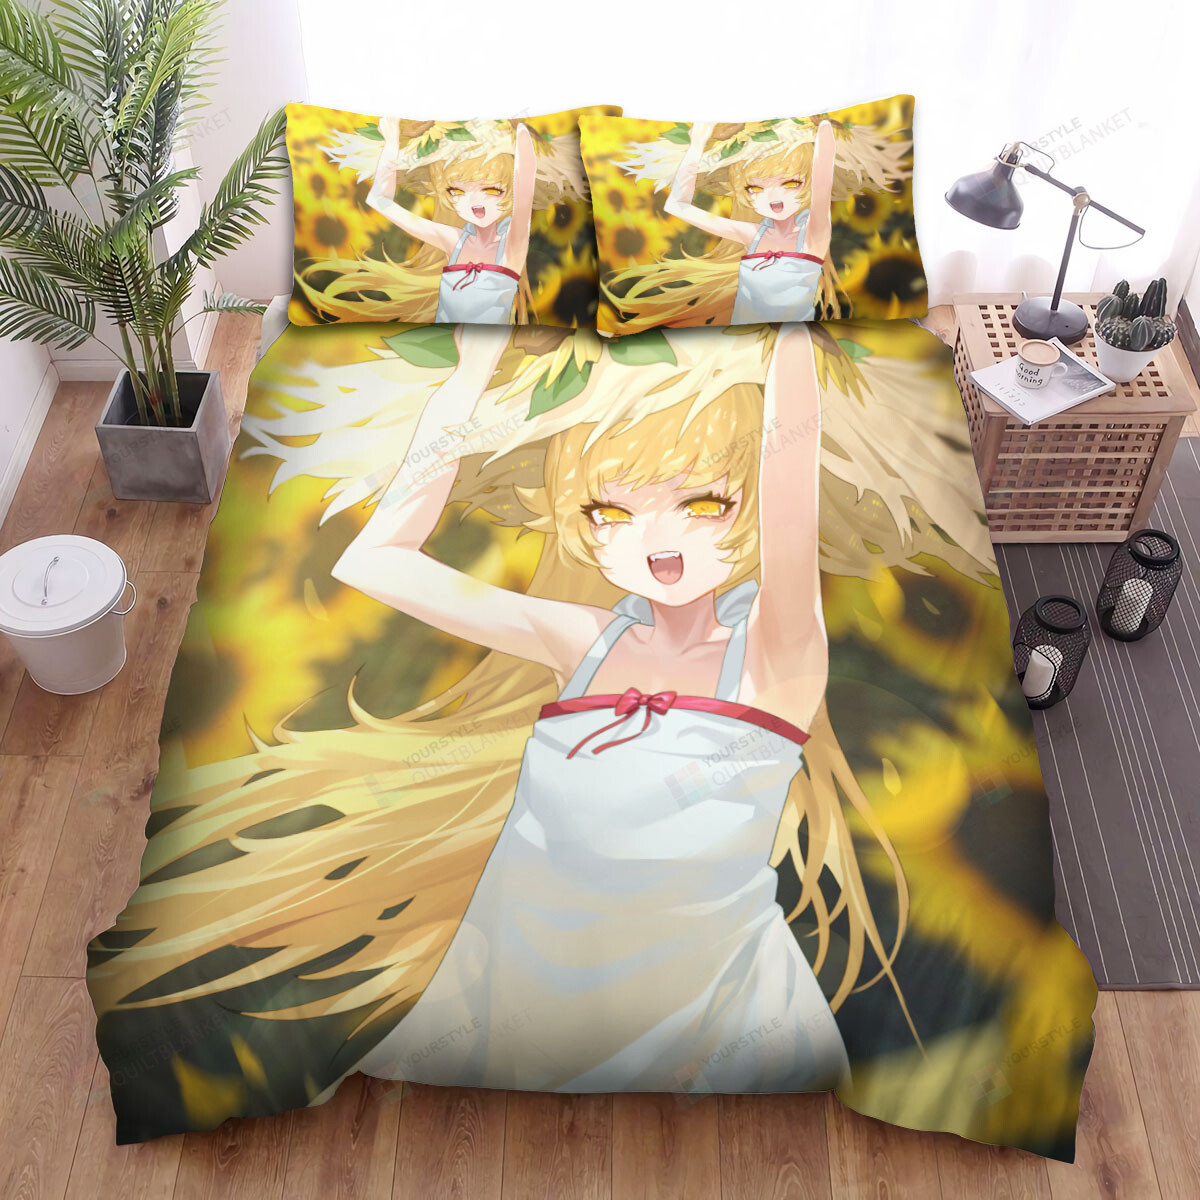 Monogatari Series Shinobu With The Sunflowers Bed Sheets Spread Comforter Duvet Cover Bedding Sets